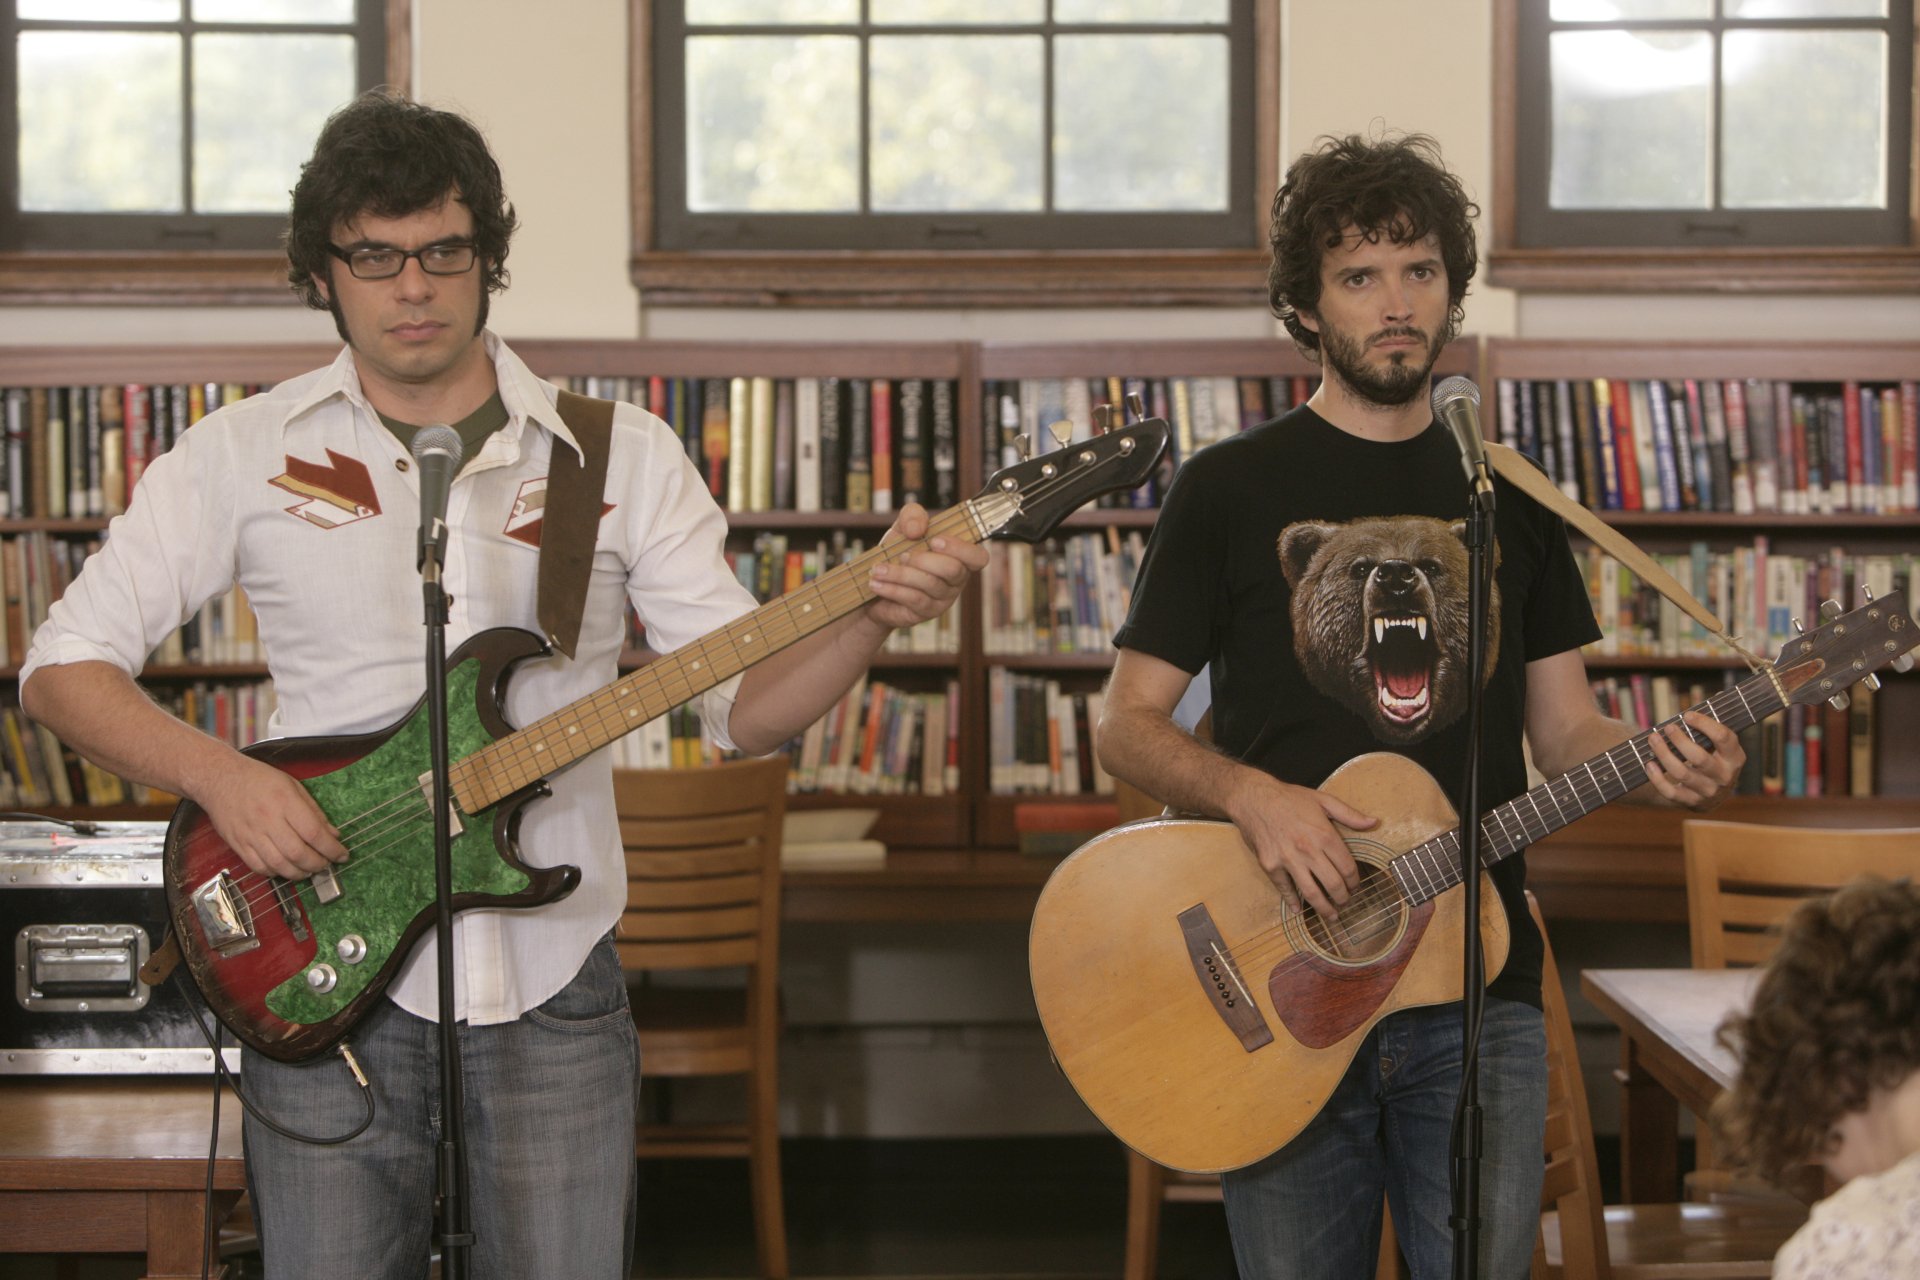 4K Flight Of The Conchords Wallpapers Background Images.